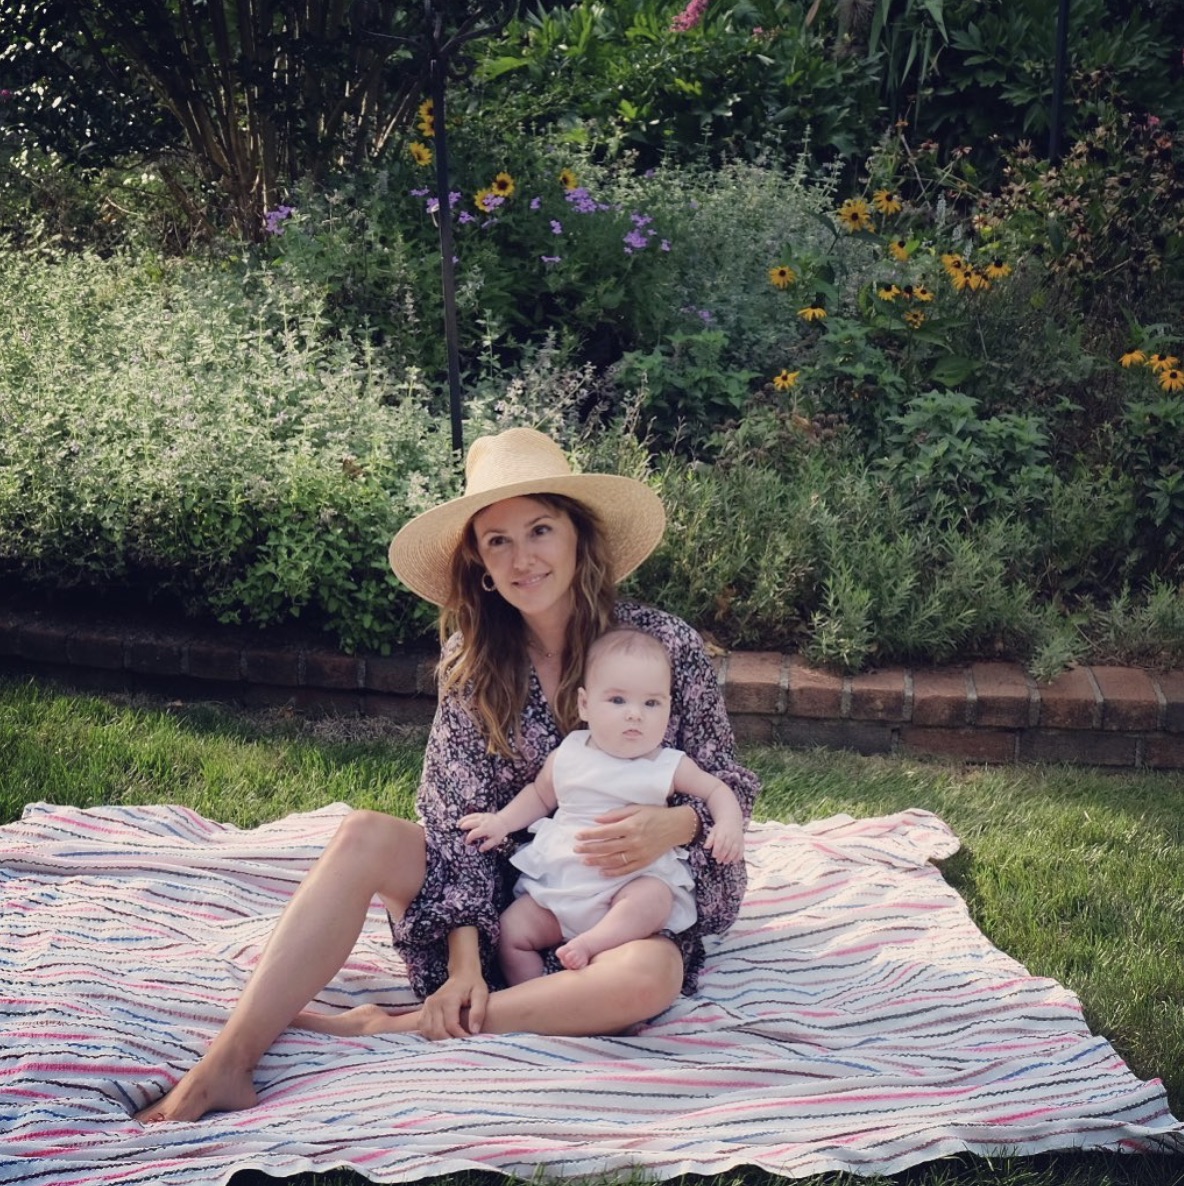 The Young and the Restless Star Elizabeth Hendrickson Can’t Wait To Introduce Josephine To Garden Parties